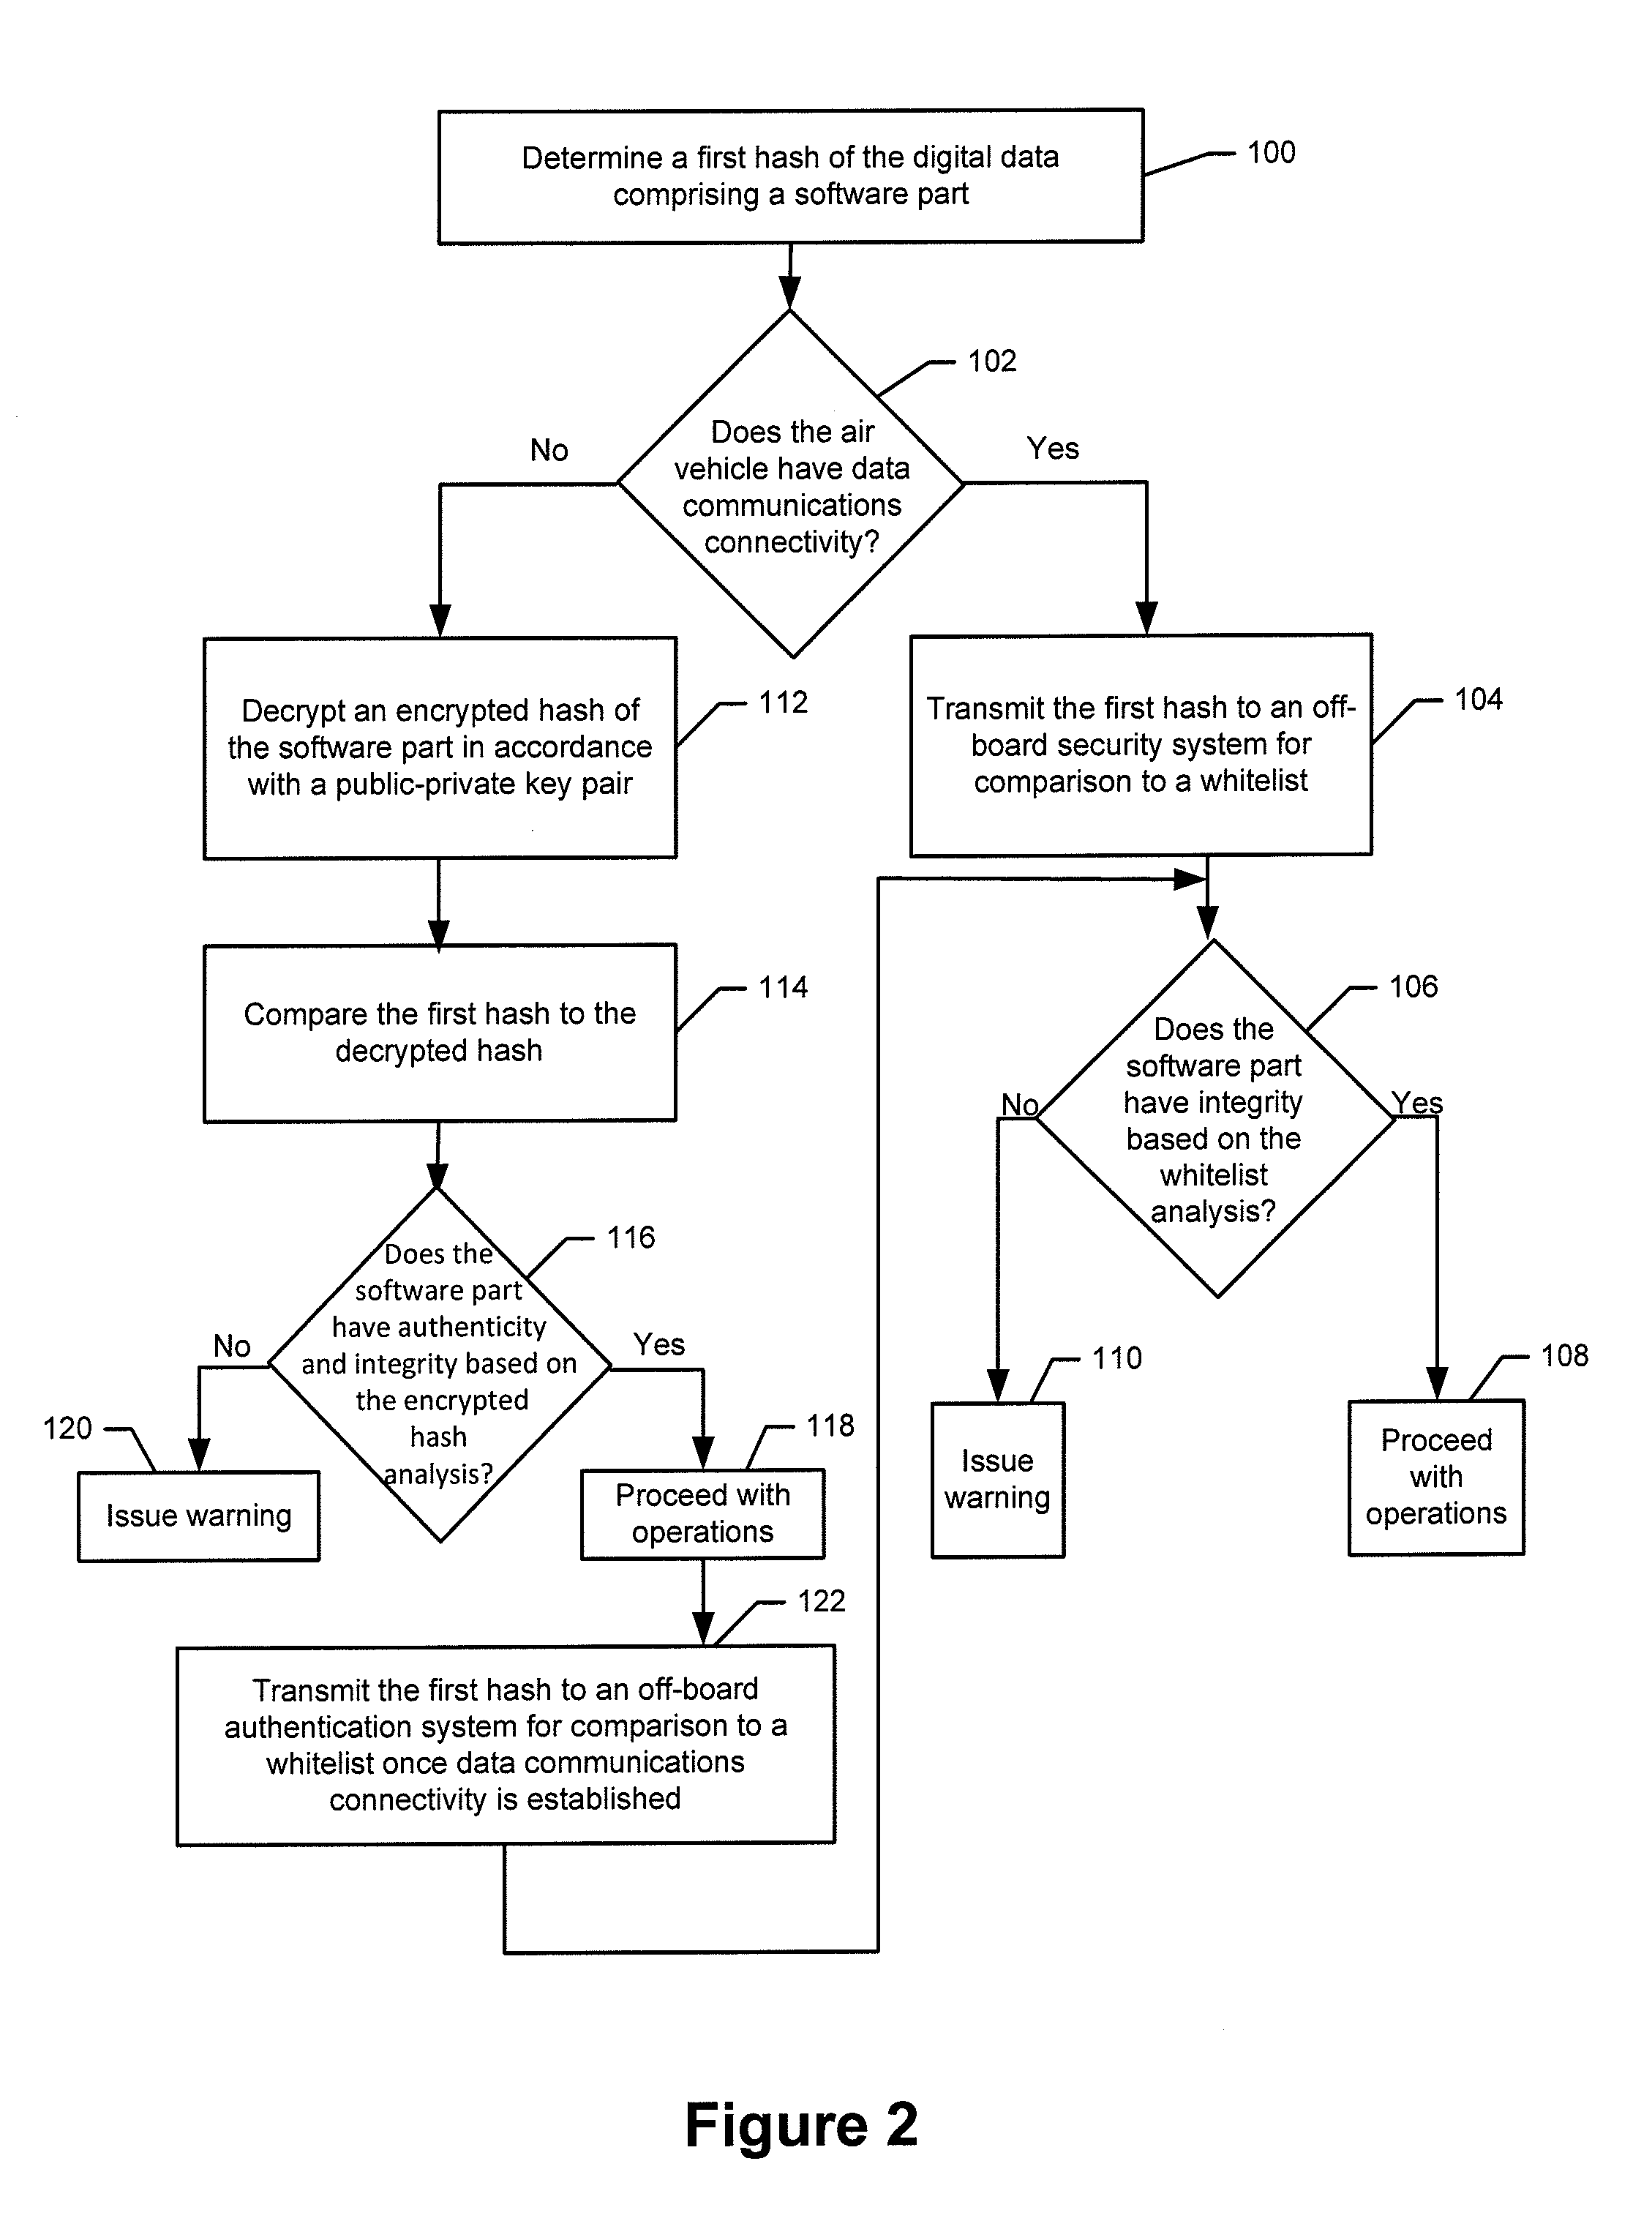 Methods, apparatus and computer program products for authenticating and determining integrity of a software part of an air vehicle